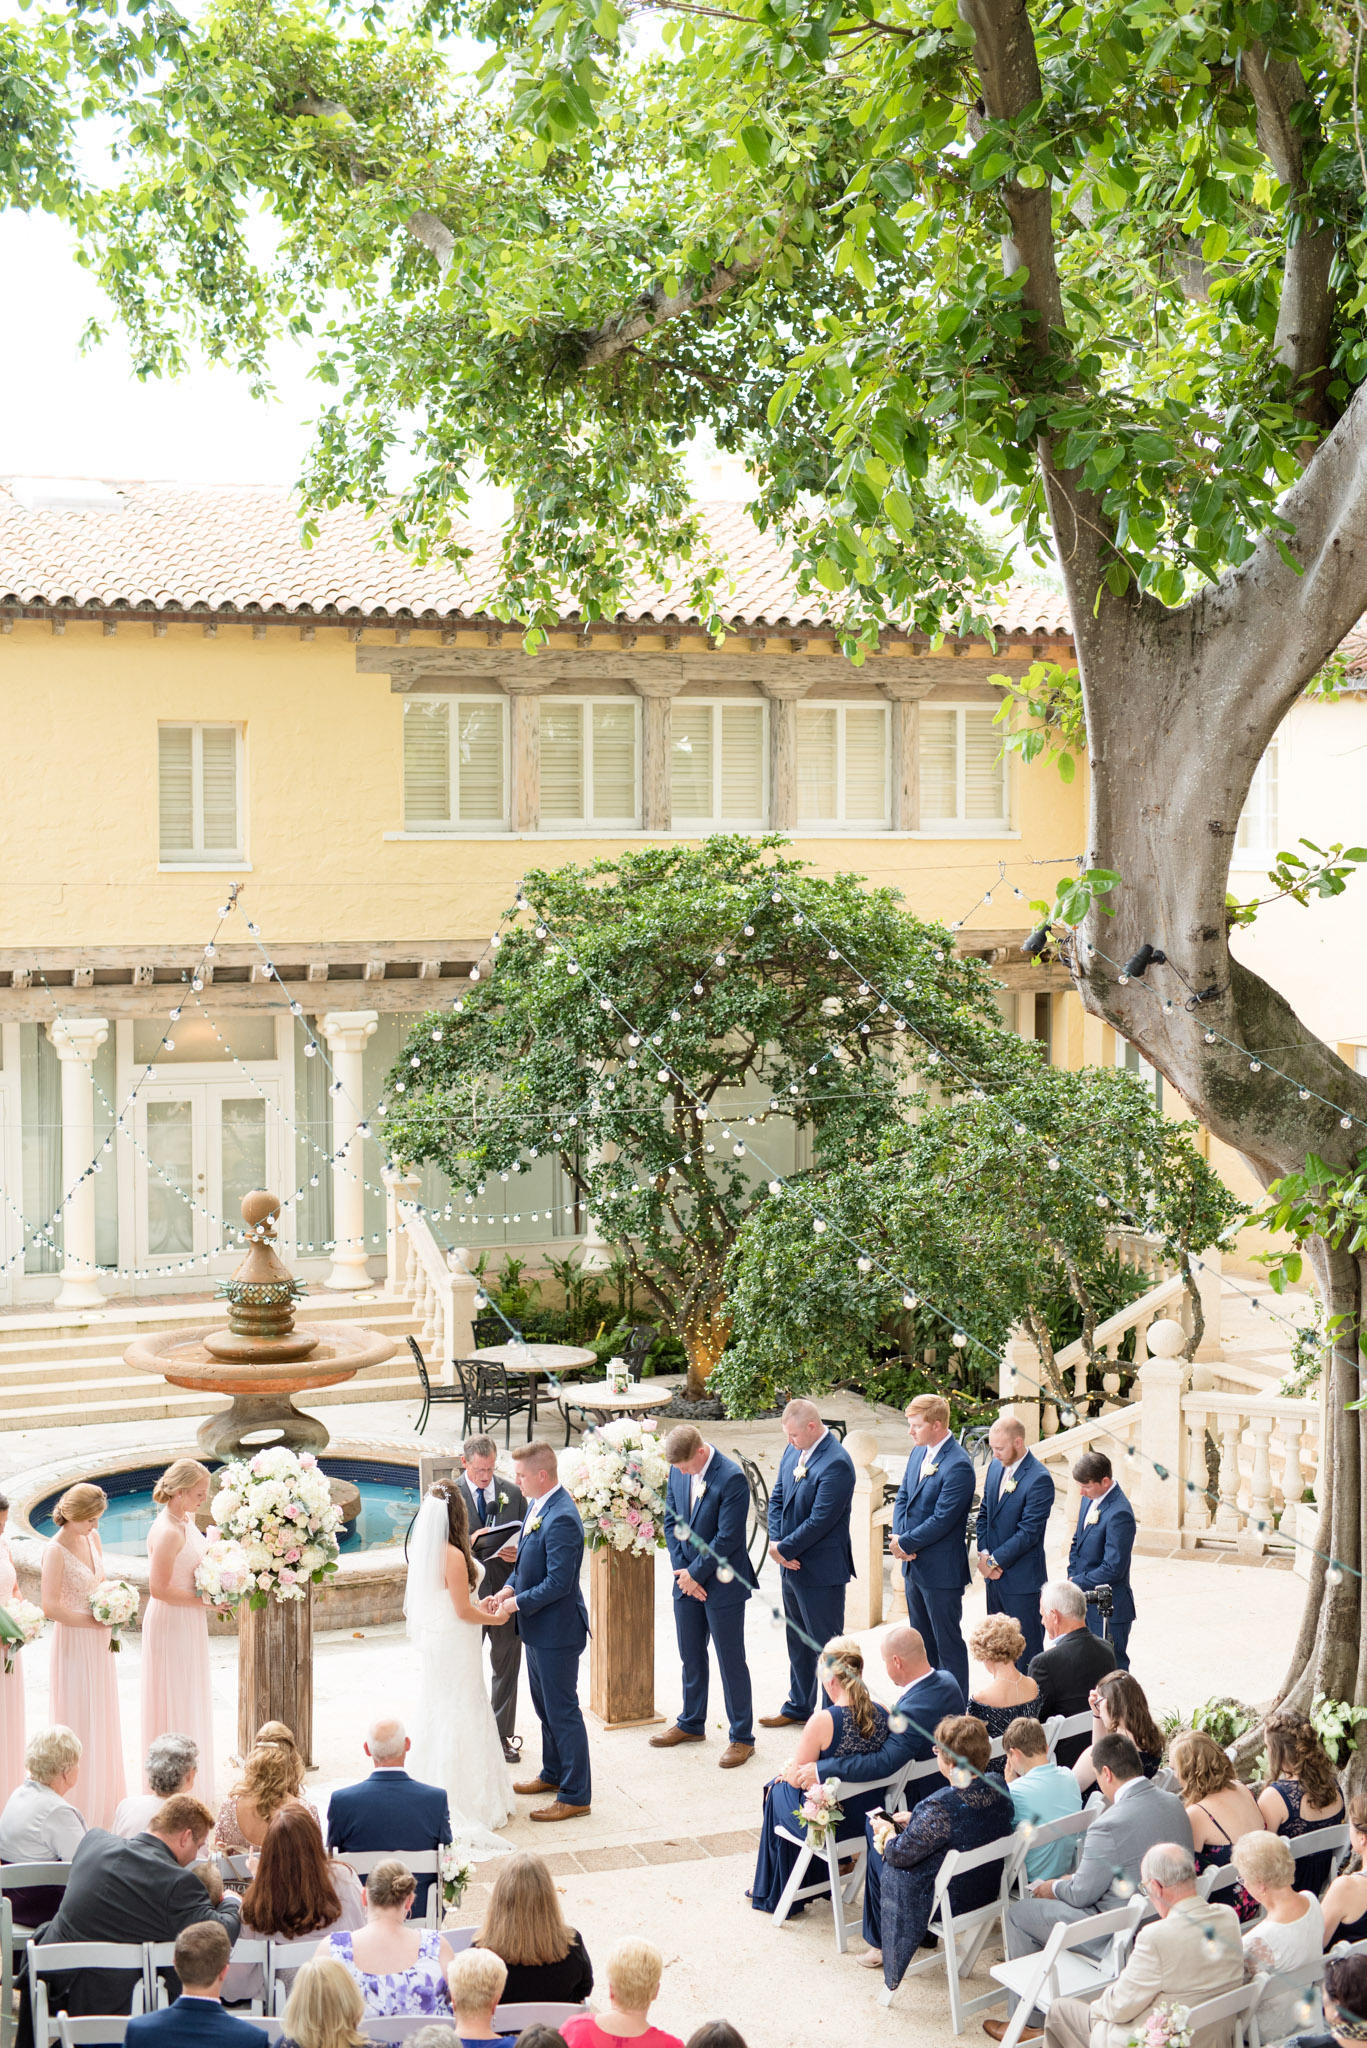 Bride and groom stand in courtyard during ceremony.